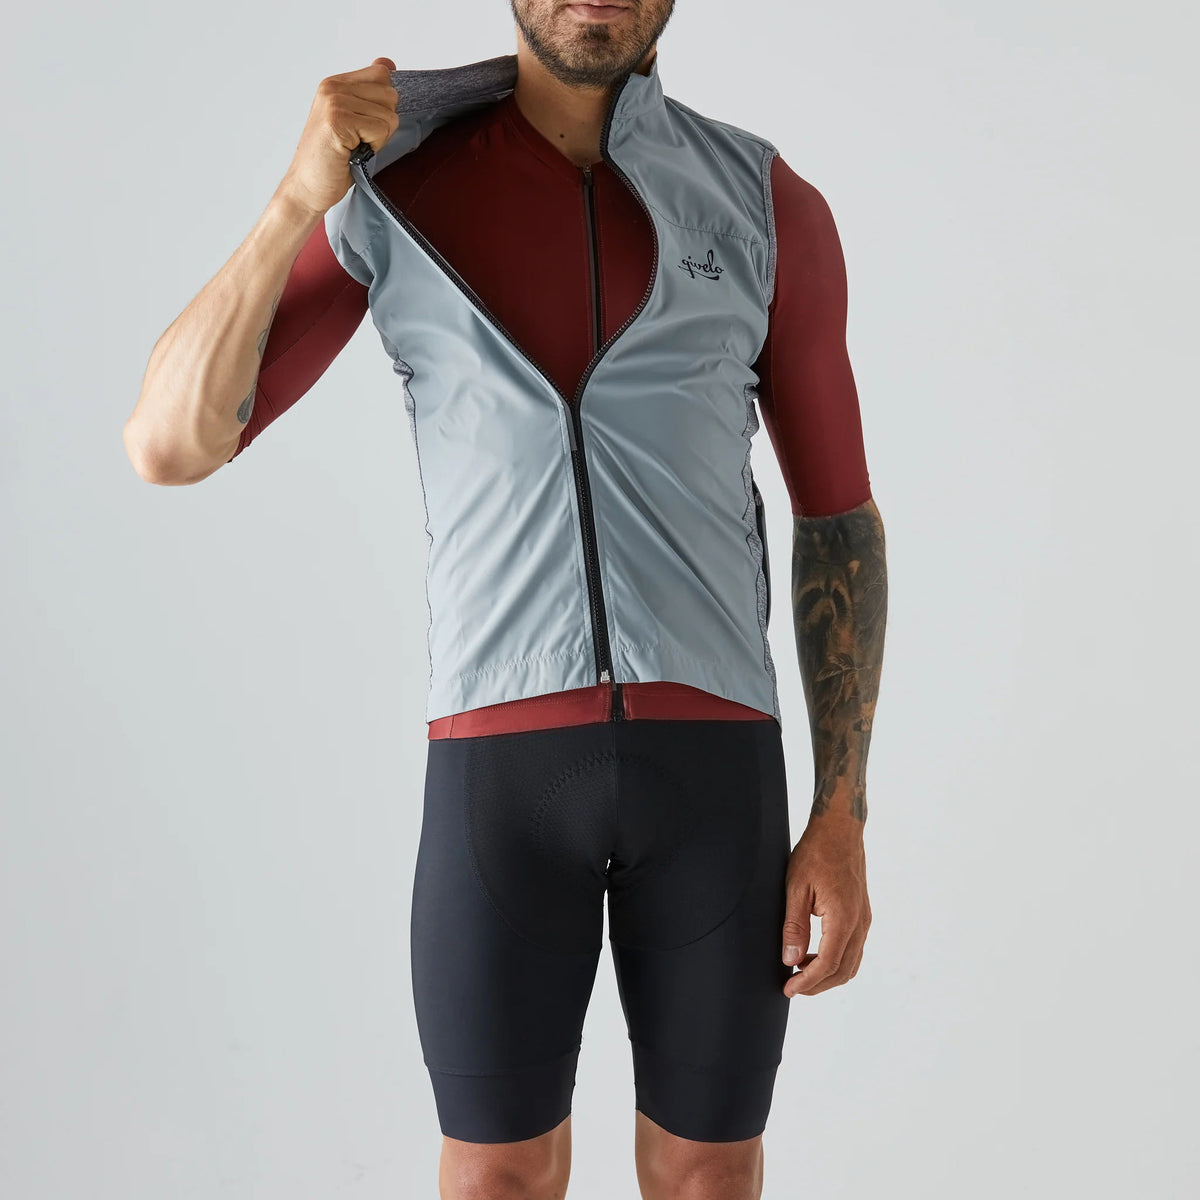 Givelo Quick-Free Gilet Grey メンズ サイクルジレ | GEARED